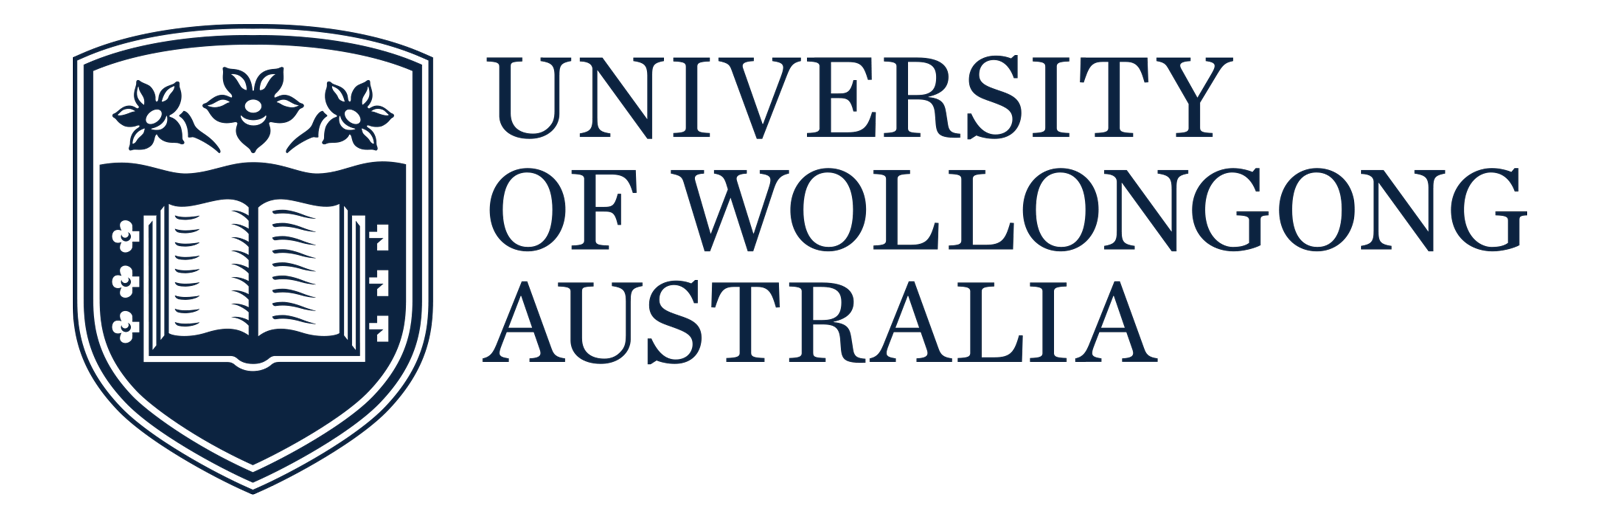 The Logo for the University of Wollongong Australia